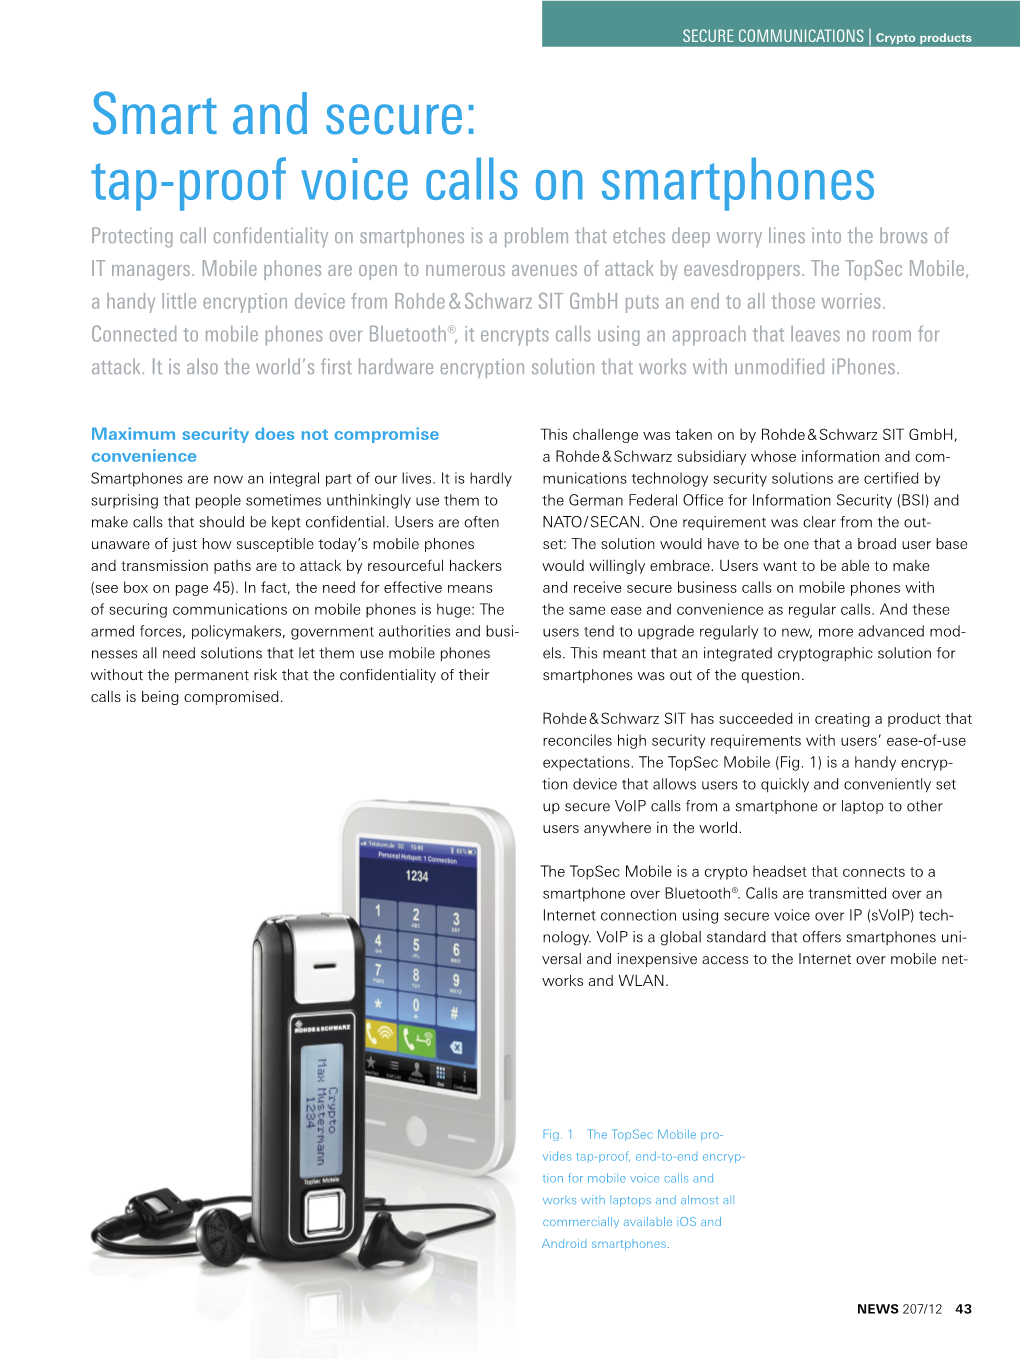 Tap-Proof Voice Calls on Smartphones Protecting Call Confidentiality on Smartphones Is a Problem That Etches Deep Worry Lines Into the Brows of IT Managers